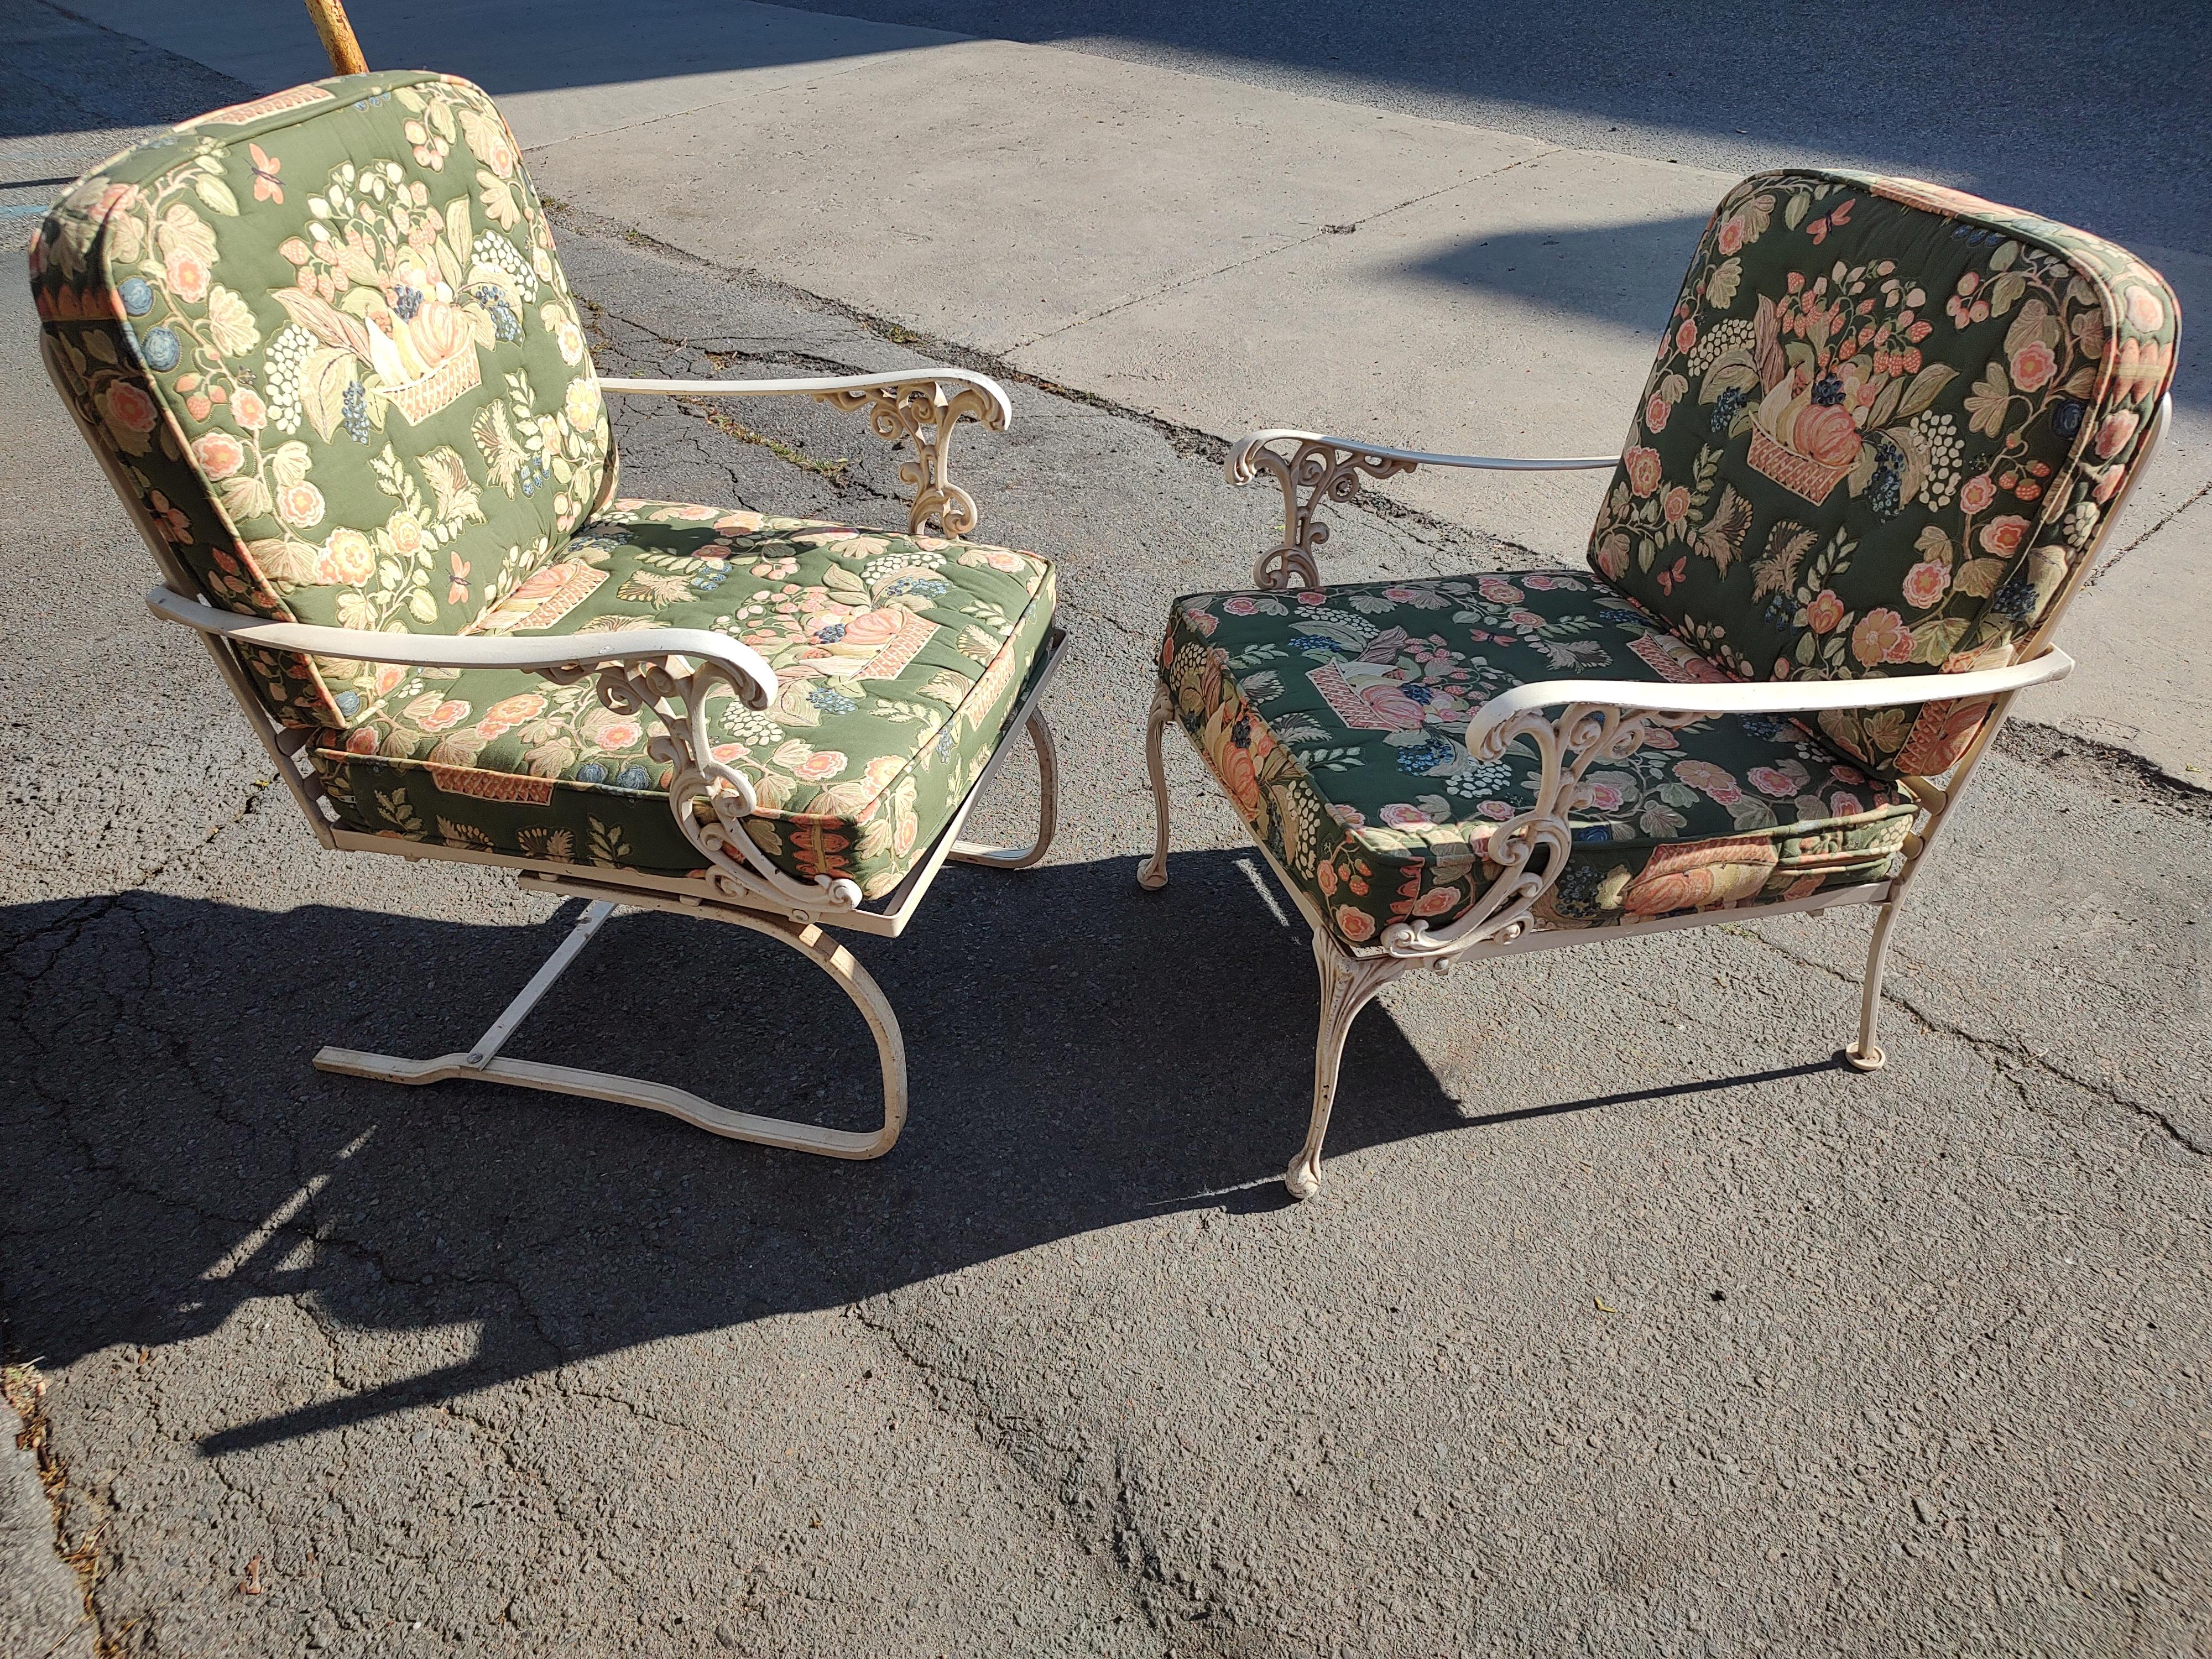 Pair of Molla Garden Lounge Chairs Cast Aluminum with Embossed Pattern Cushions For Sale 4